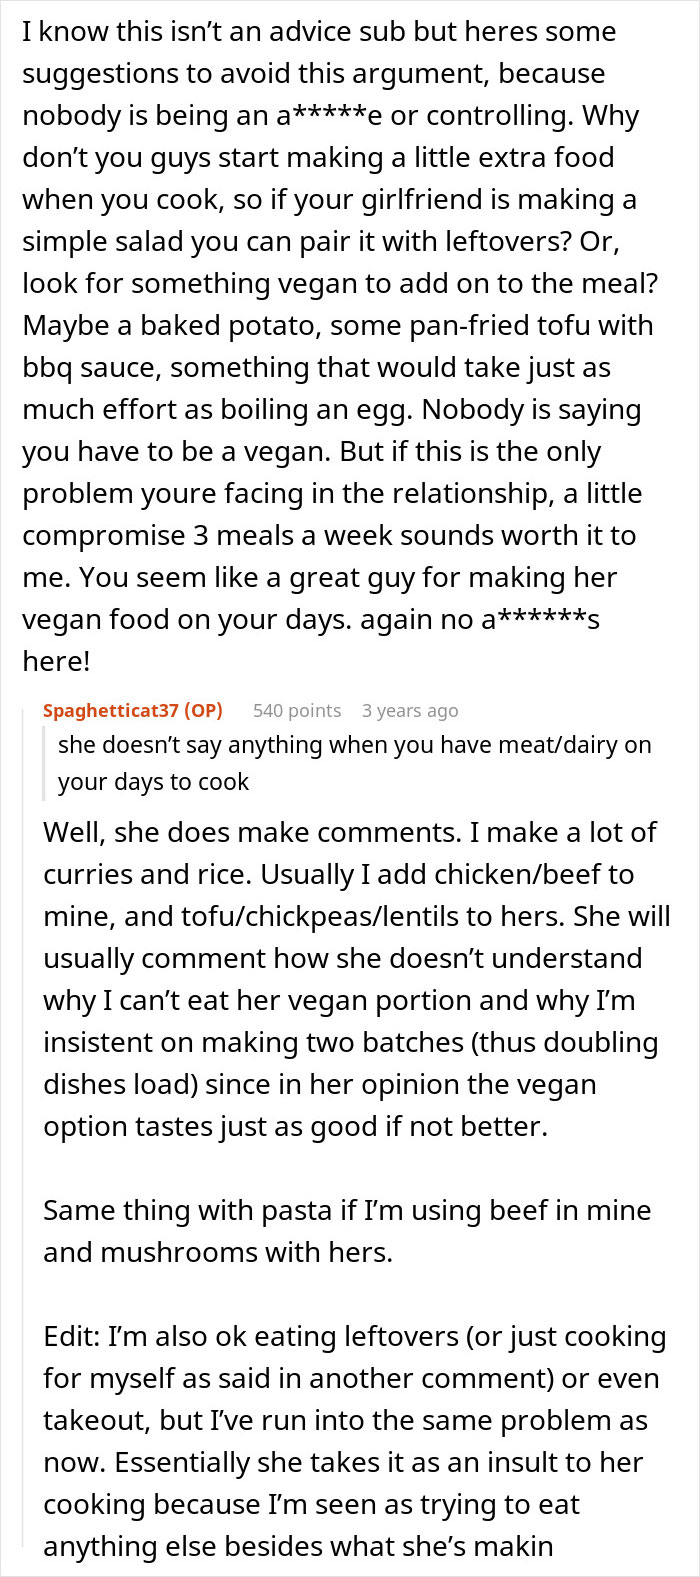 “AITA For Adding Meat To My Girlfriend’s Vegan Dishes?”